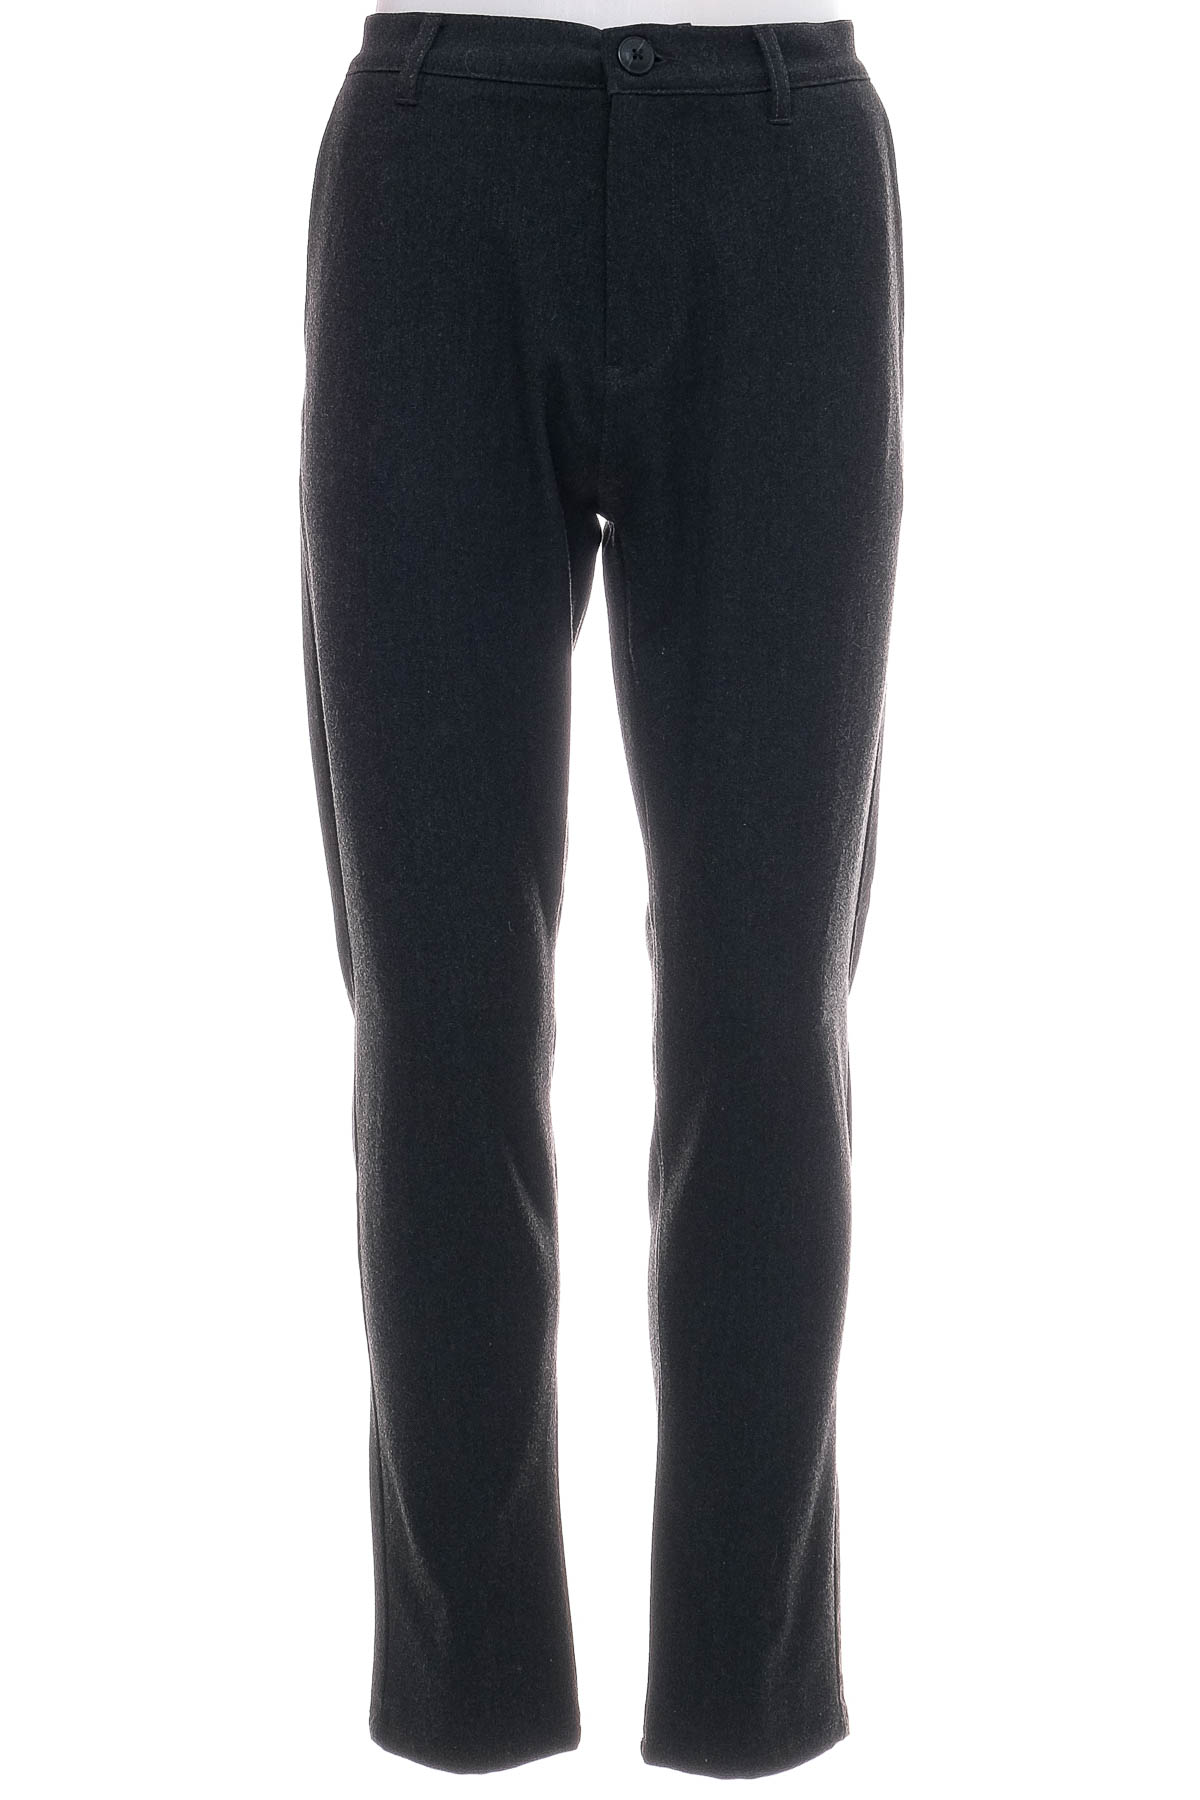 Men's trousers - ! Solid - 0